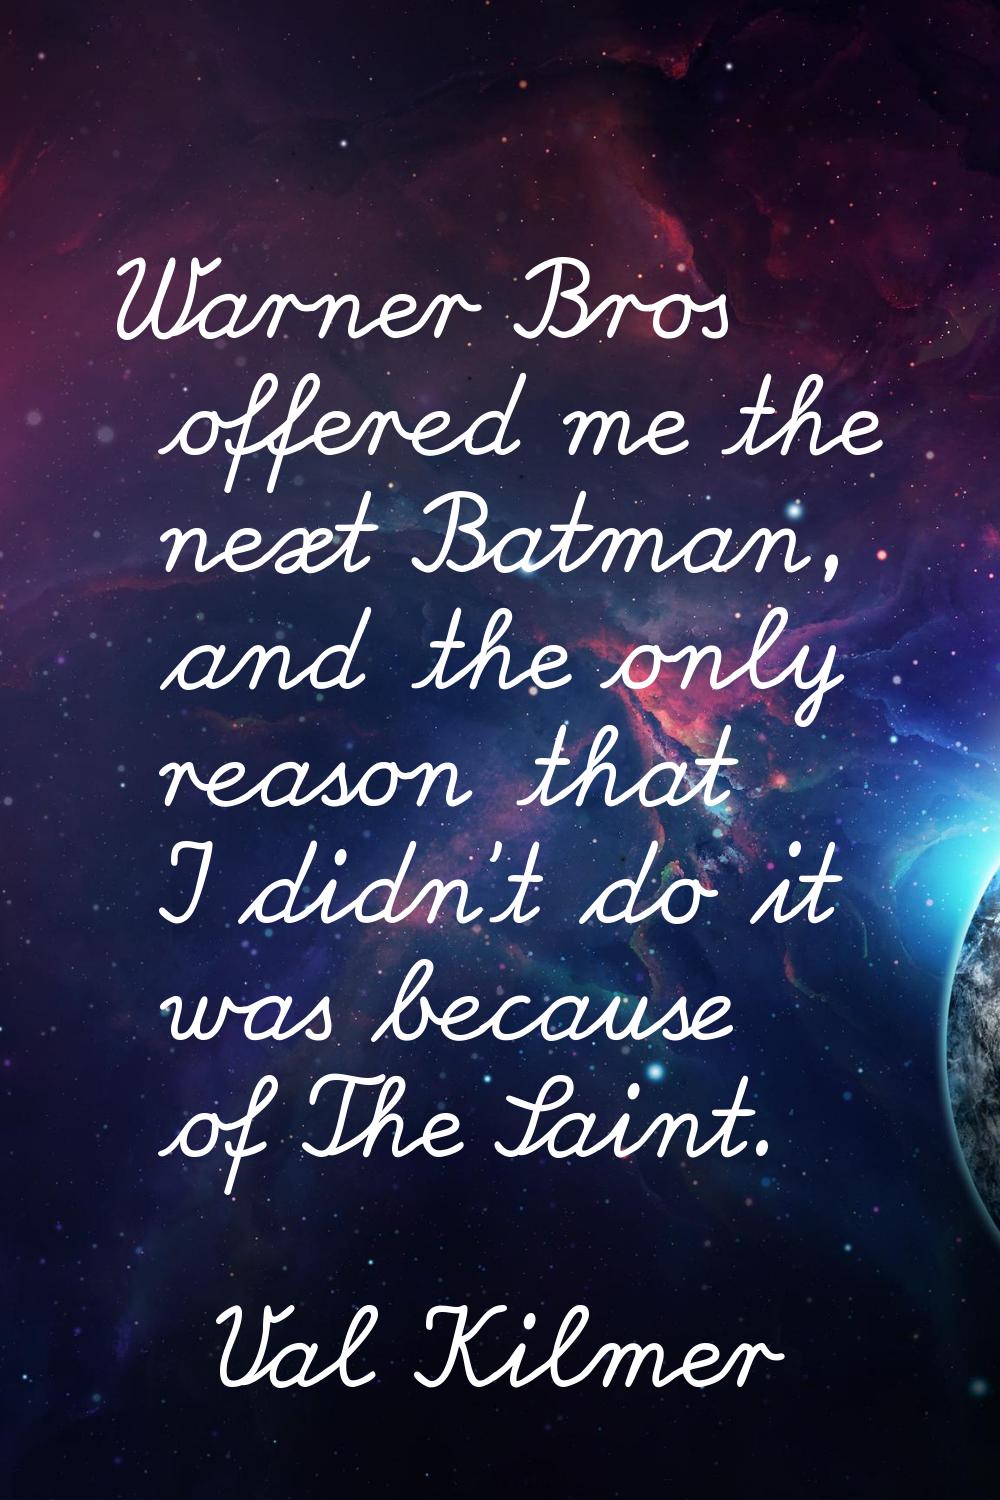 Warner Bros offered me the next Batman, and the only reason that I didn't do it was because of The 